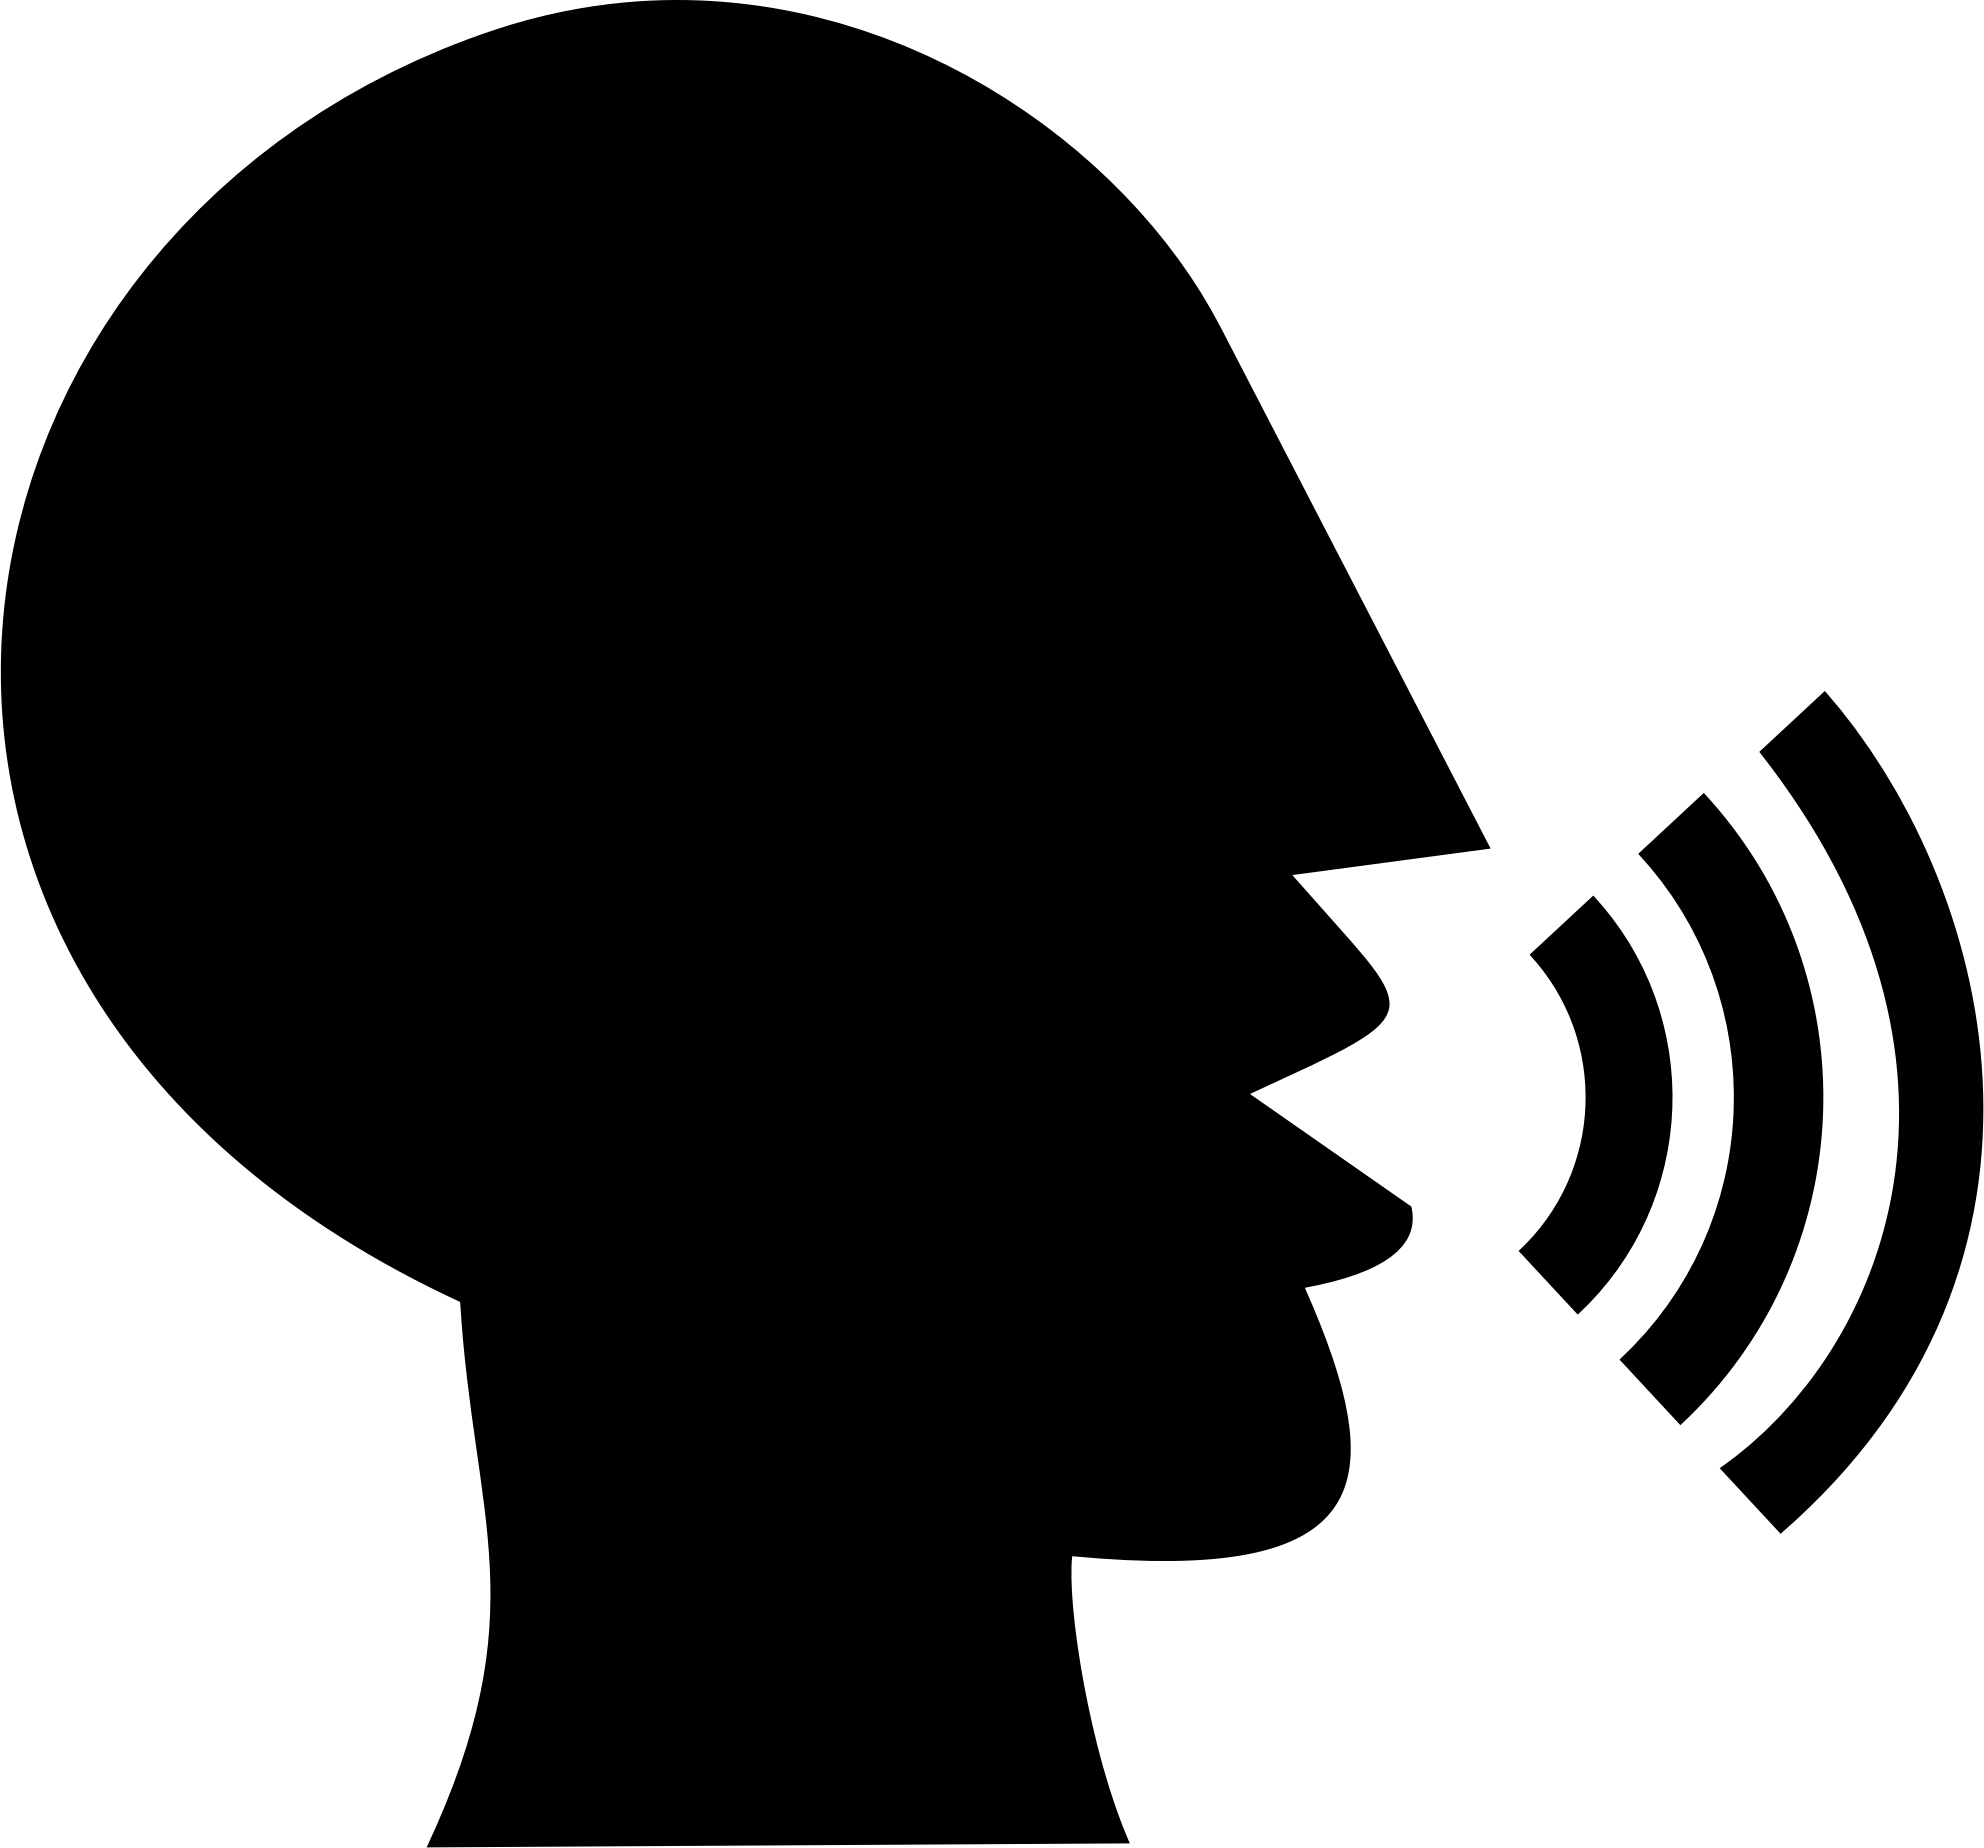 Talking Head Silhouette vector clipart image